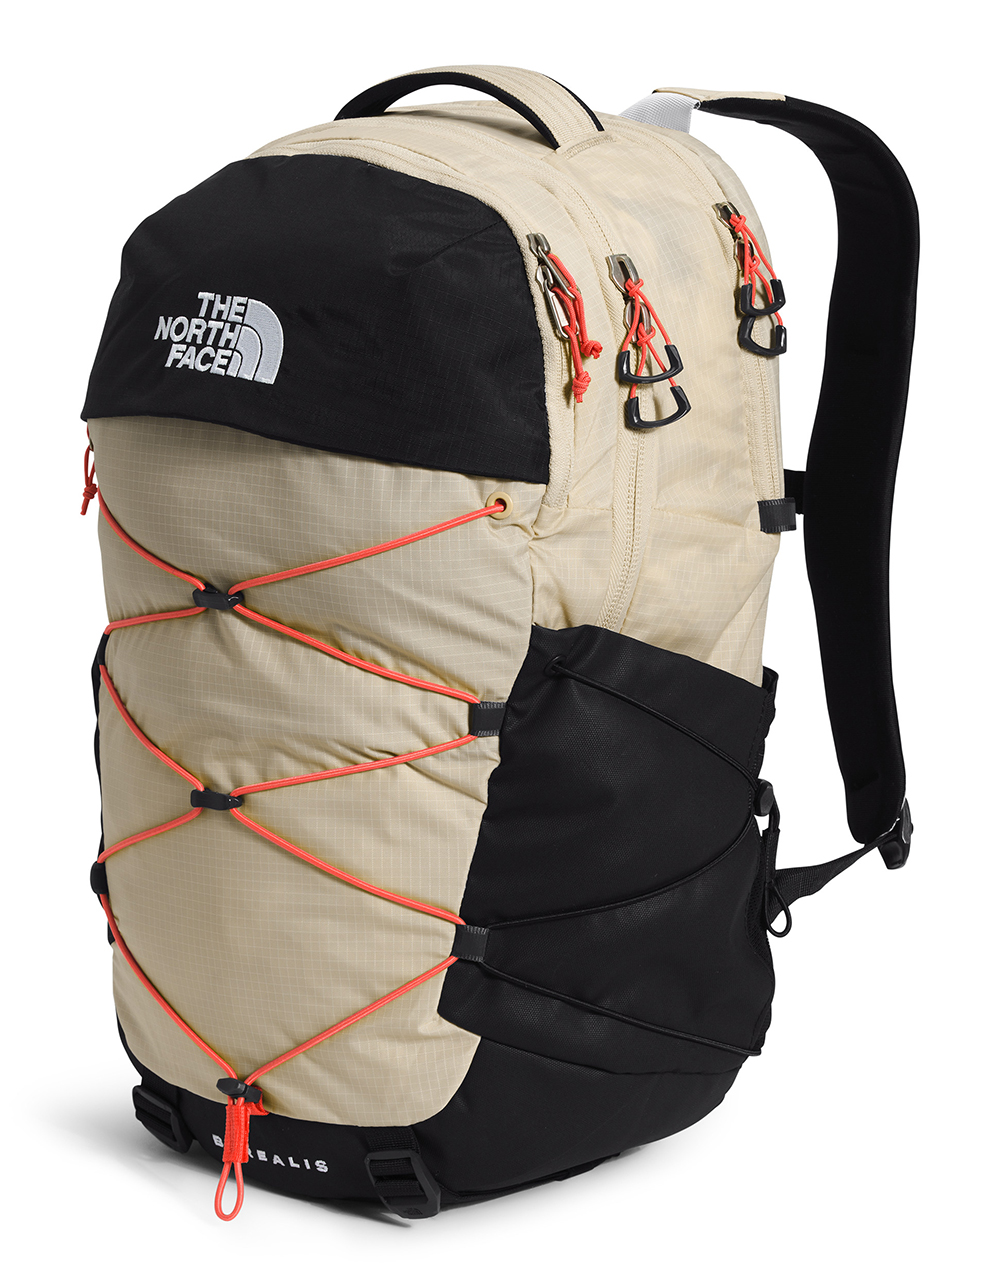 THE NORTH FACE Borealis Backpack - MULTI | Tillys